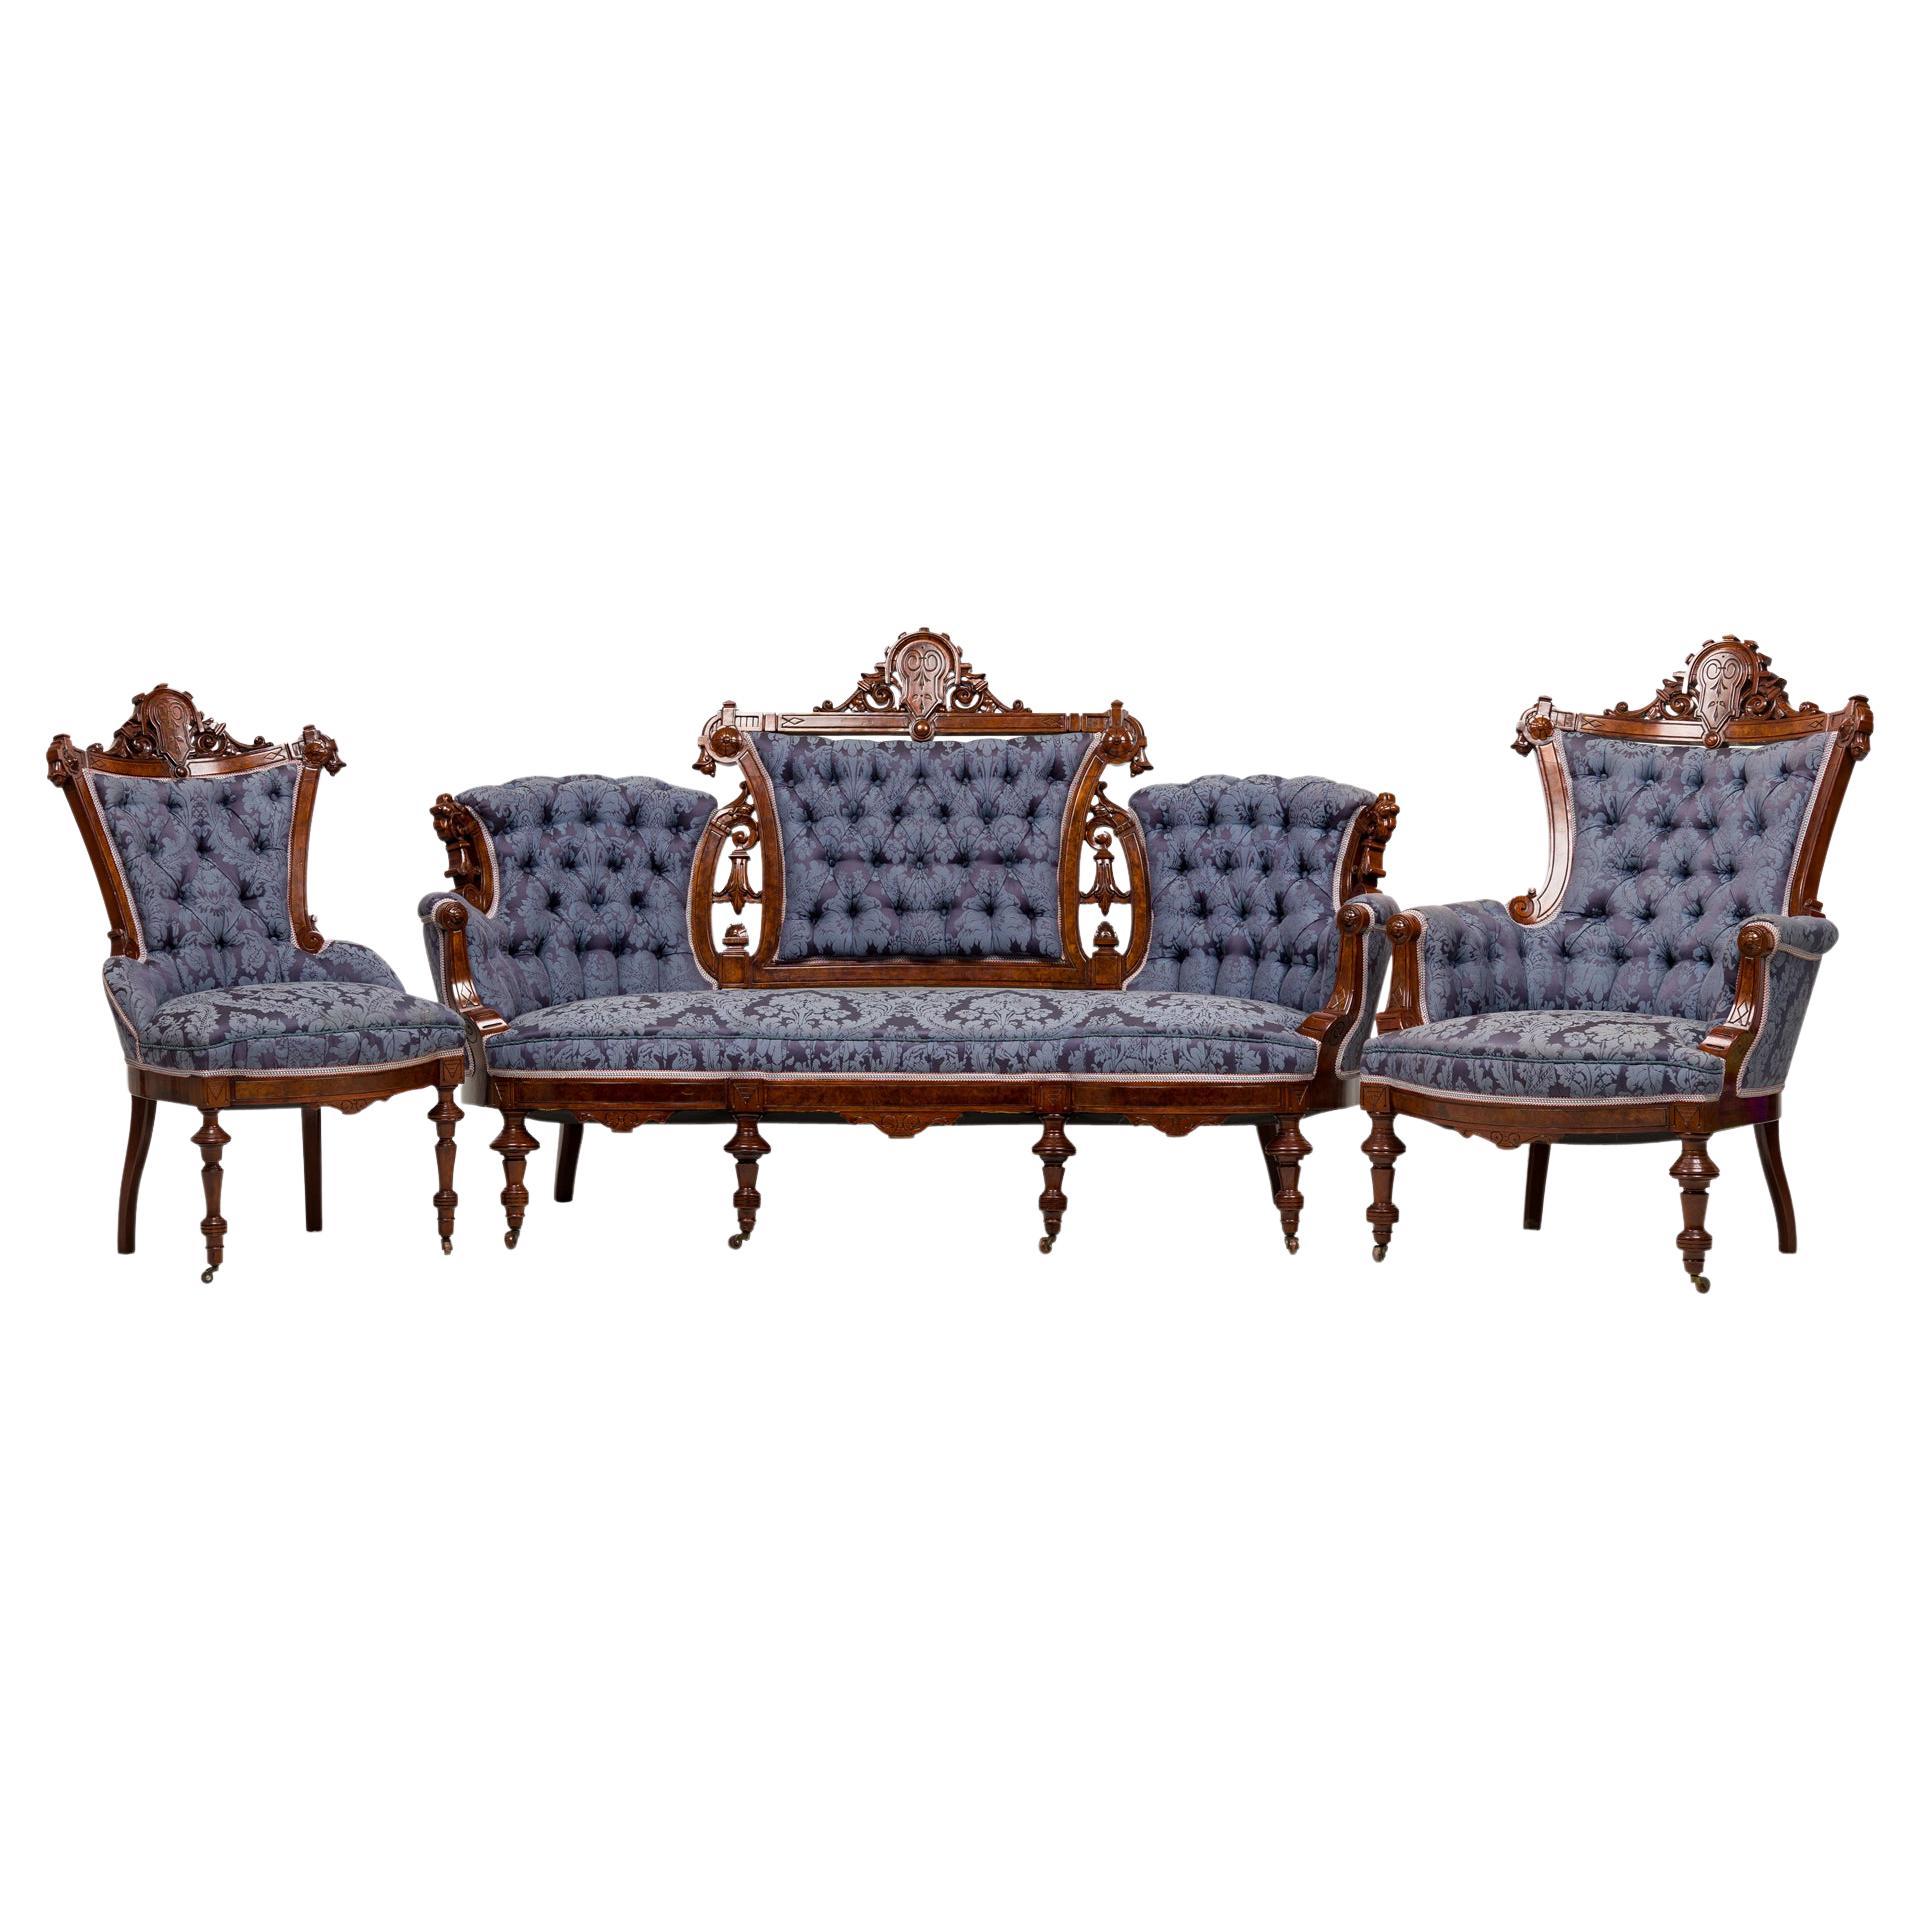 6 Piece American Victorian Blue Tufted Damask Mahogany Living Room Set